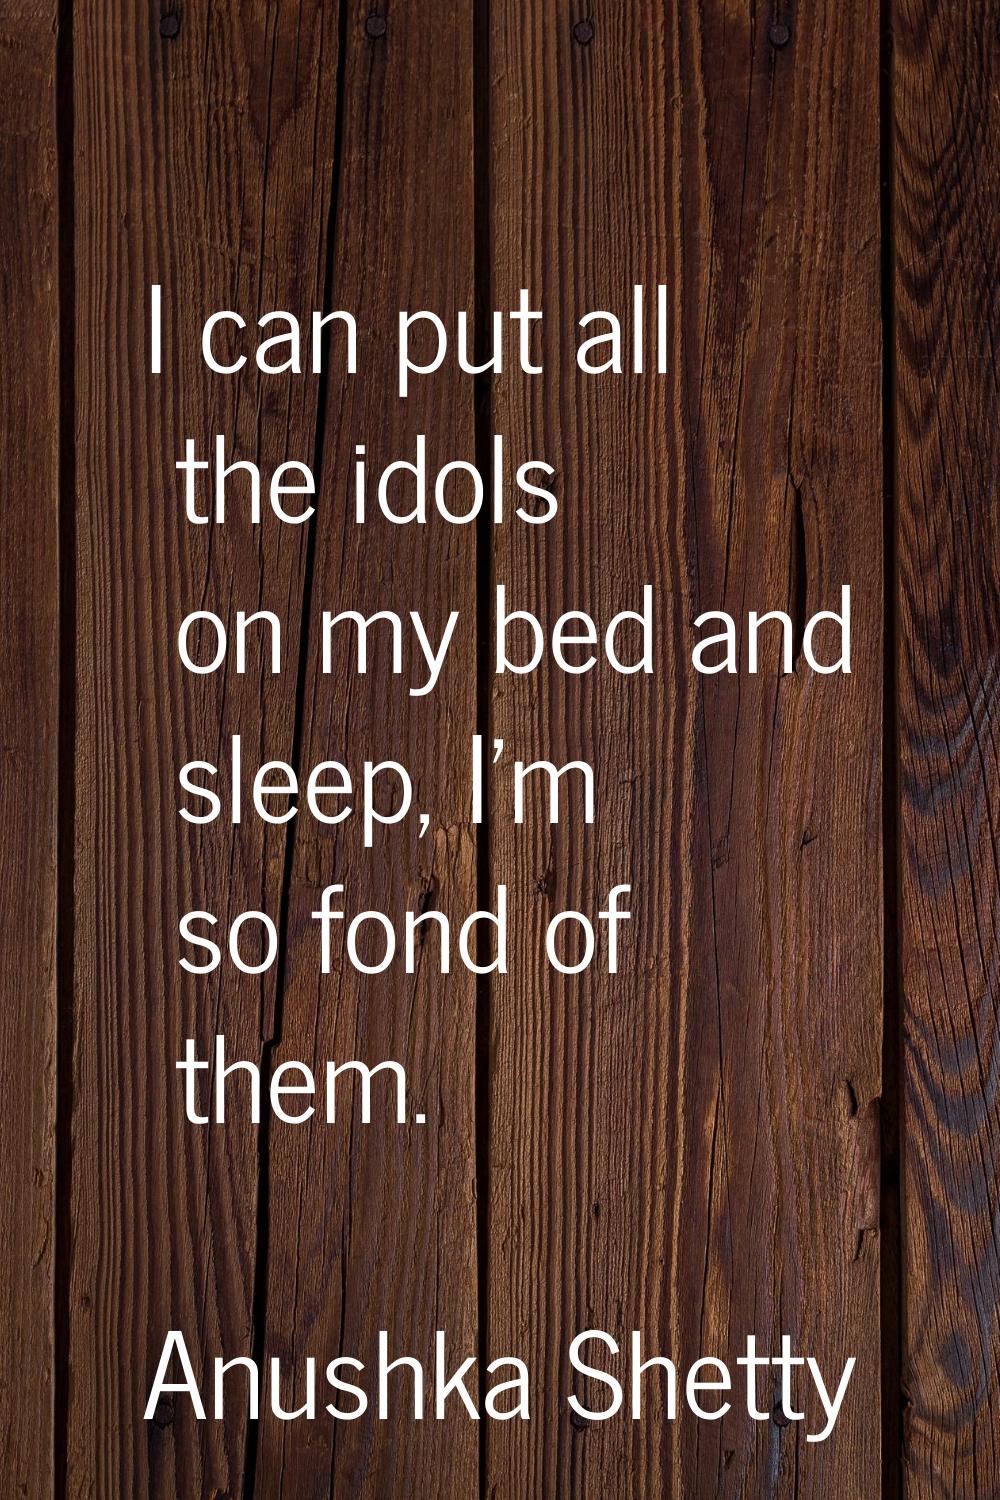 I can put all the idols on my bed and sleep, I'm so fond of them.